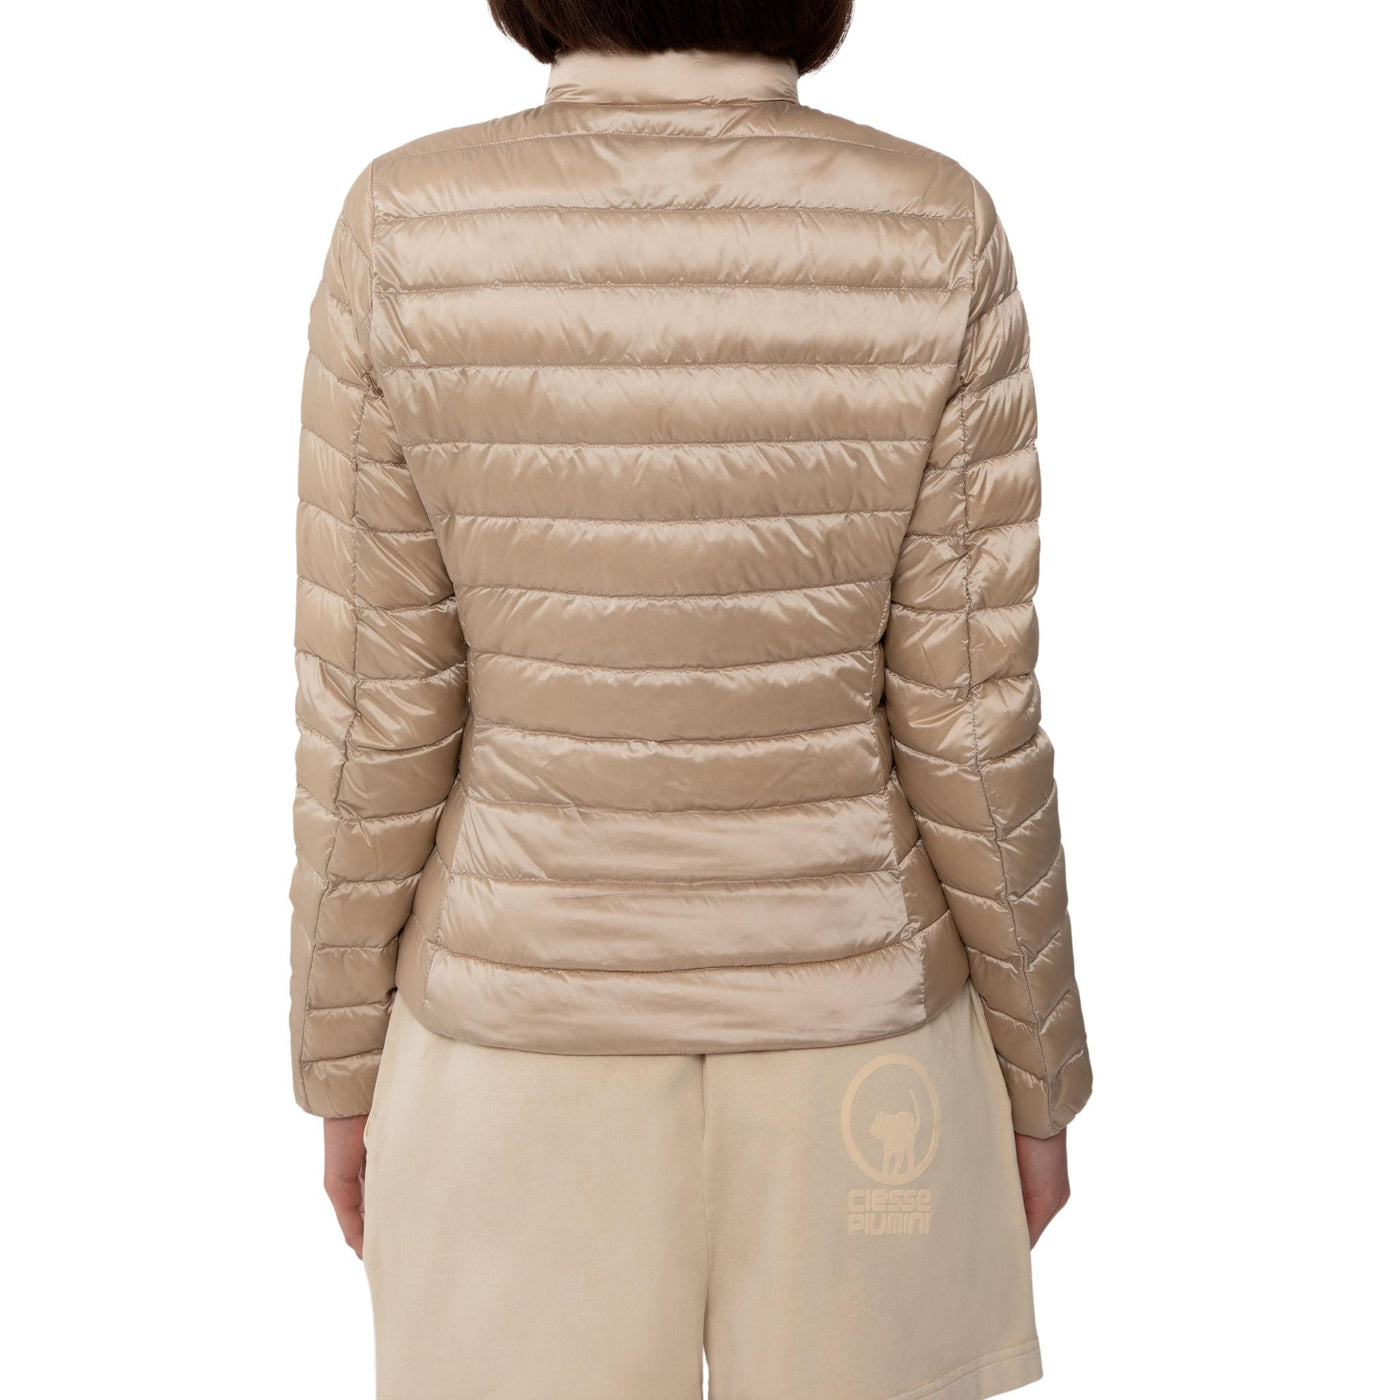 Woman down jacket with large side pockets